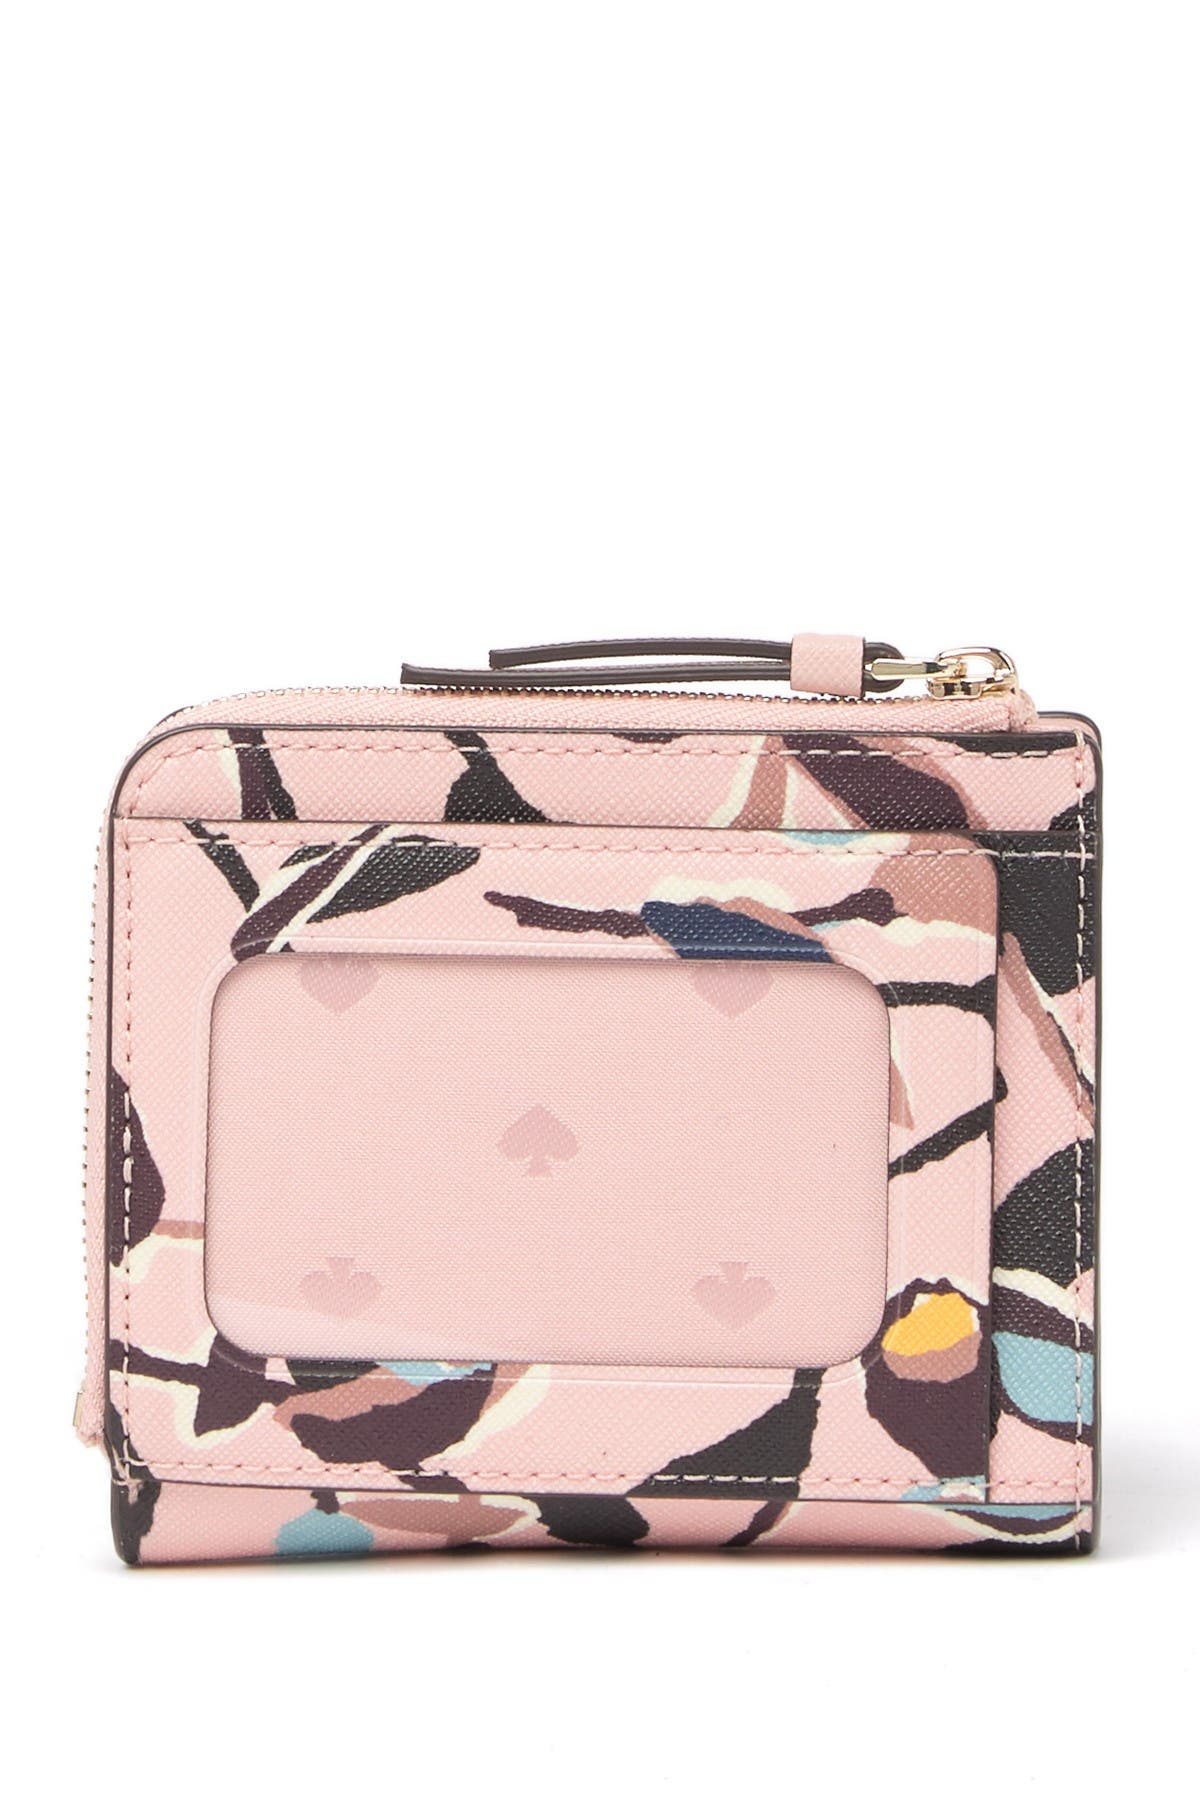 Kate Spade Leather Cameron Paper Rose Small L-zip Wallet In Pink Multi